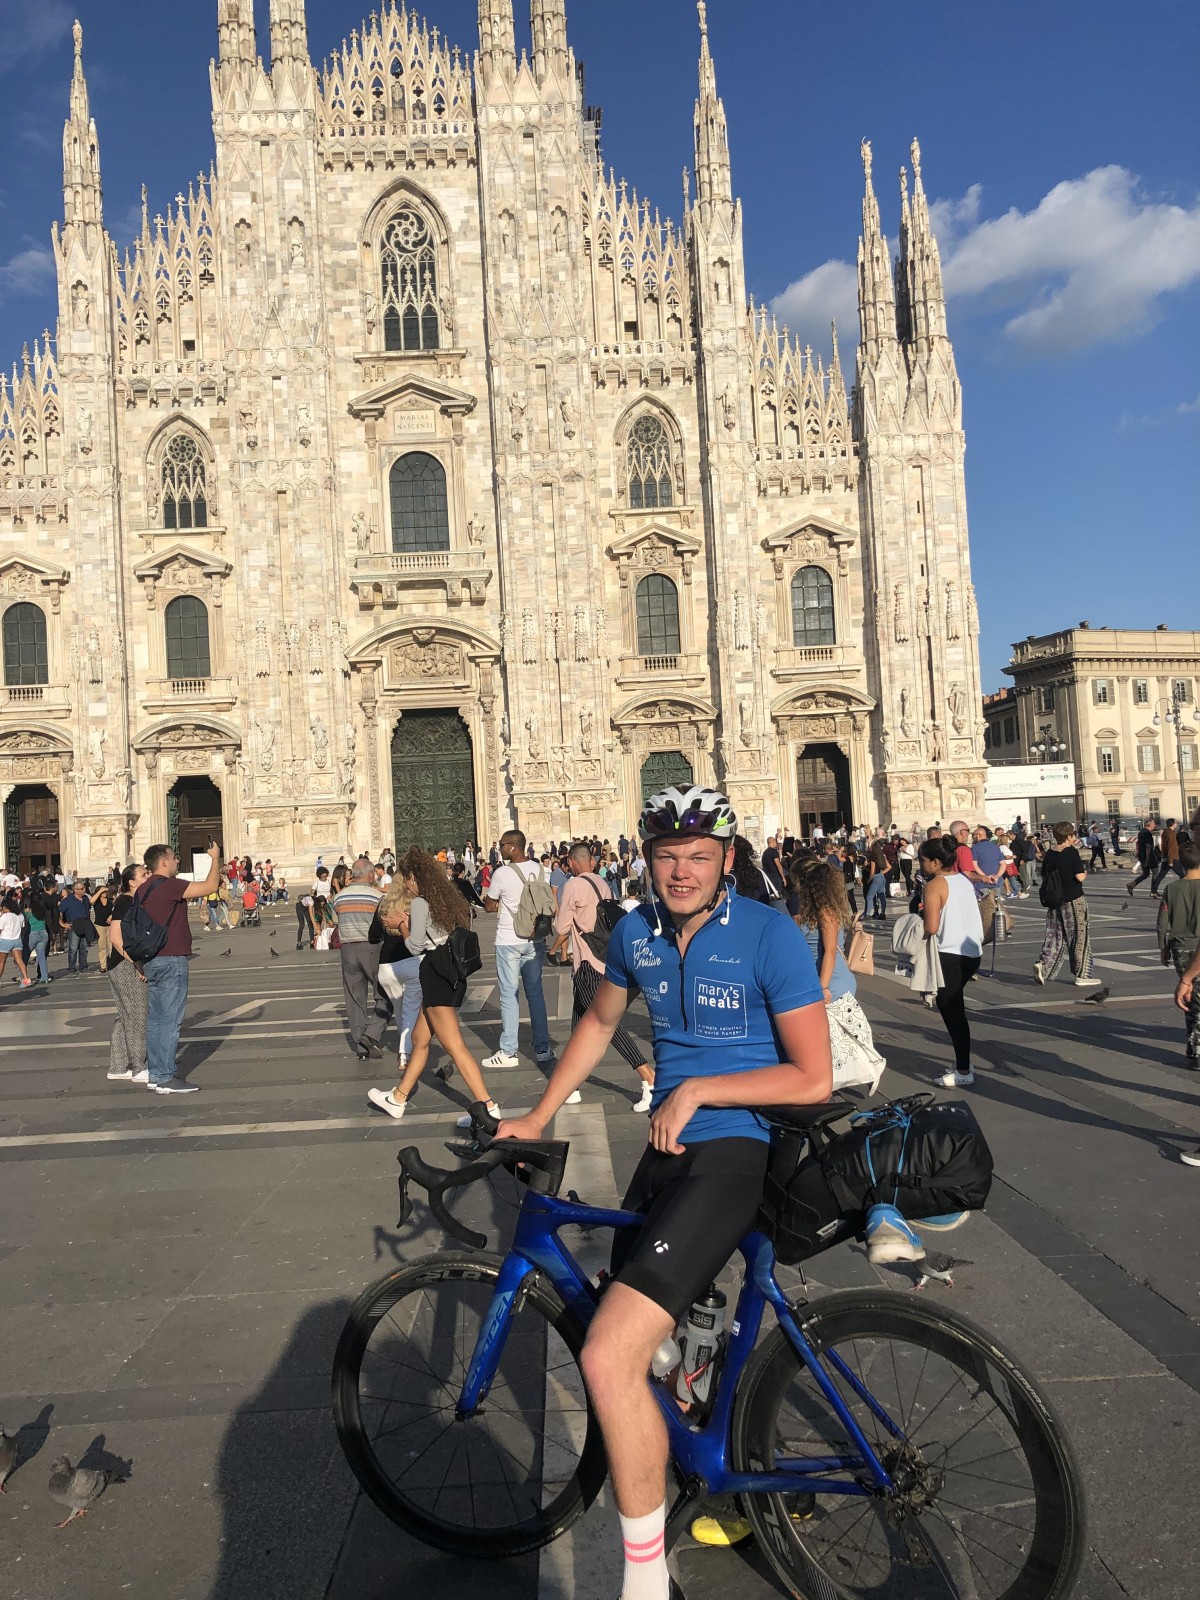 "Outside the Milan cathedral after completing the mission" - Olly